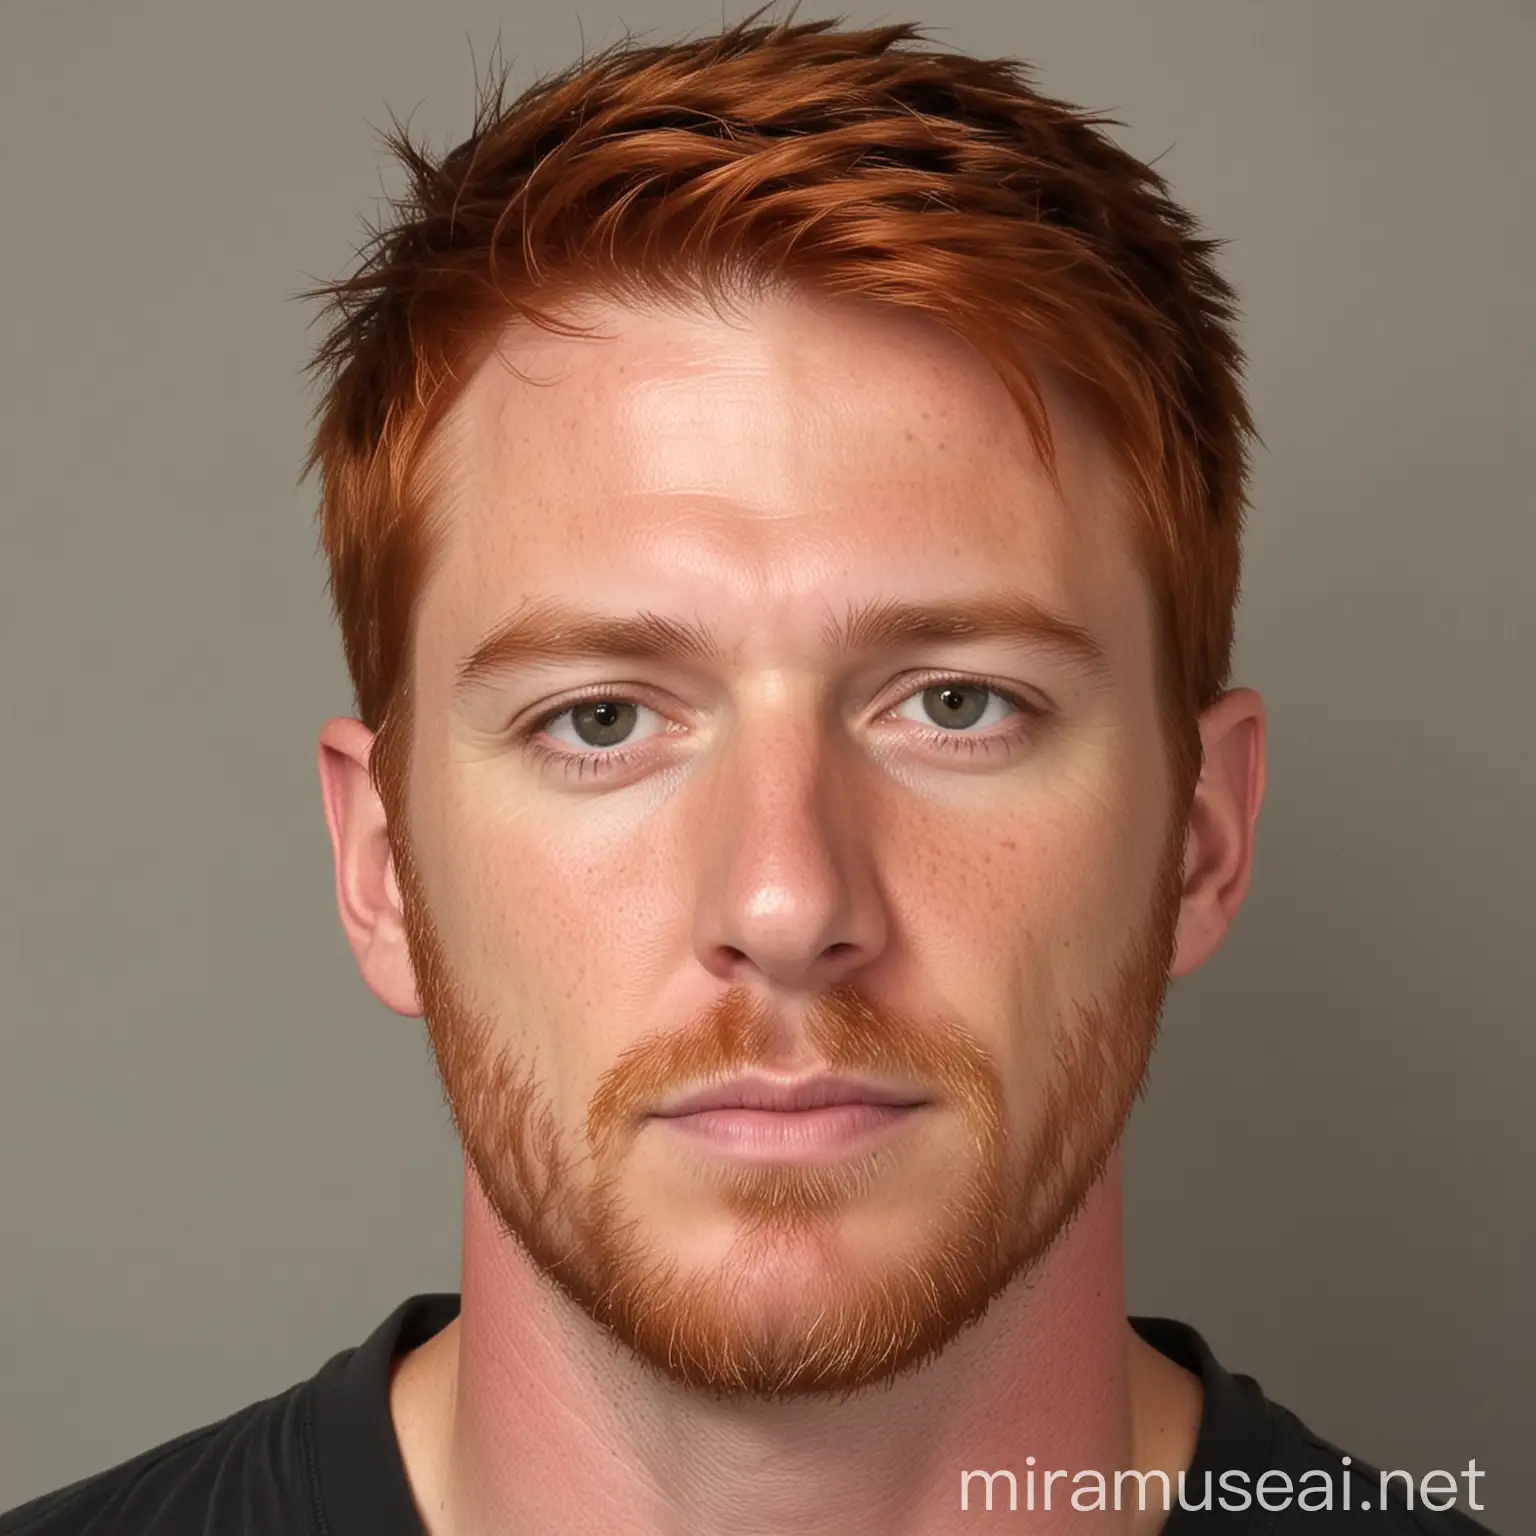 White male, 35 years, red hair, 